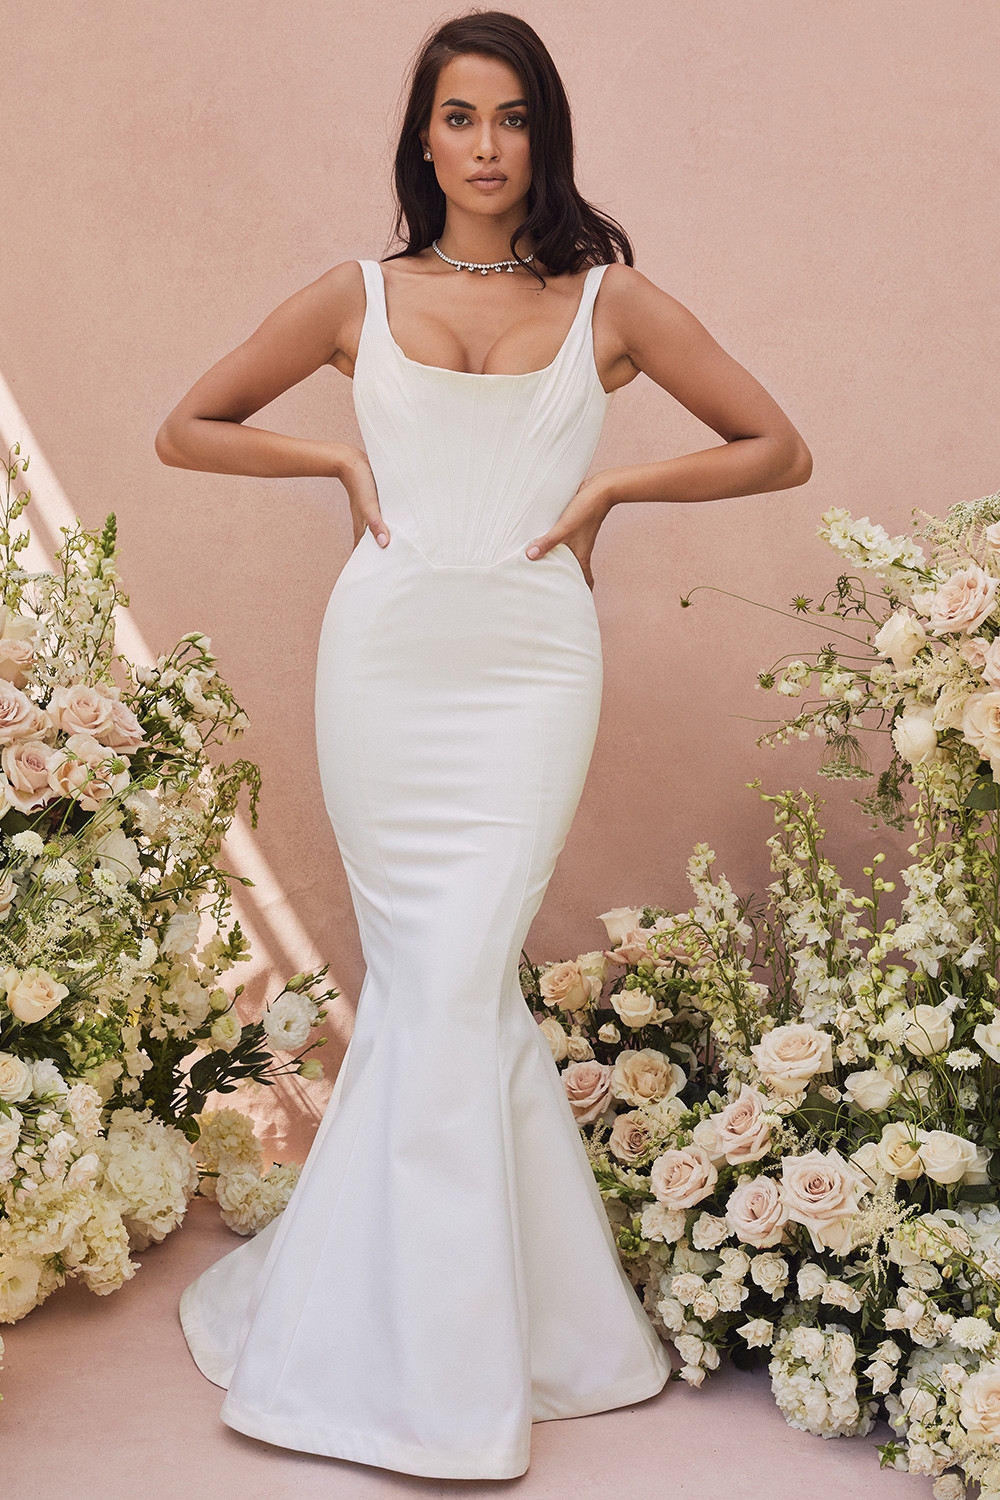 Estelle, Ivory Satin Mermaid Bridal Gown - Limited Edition